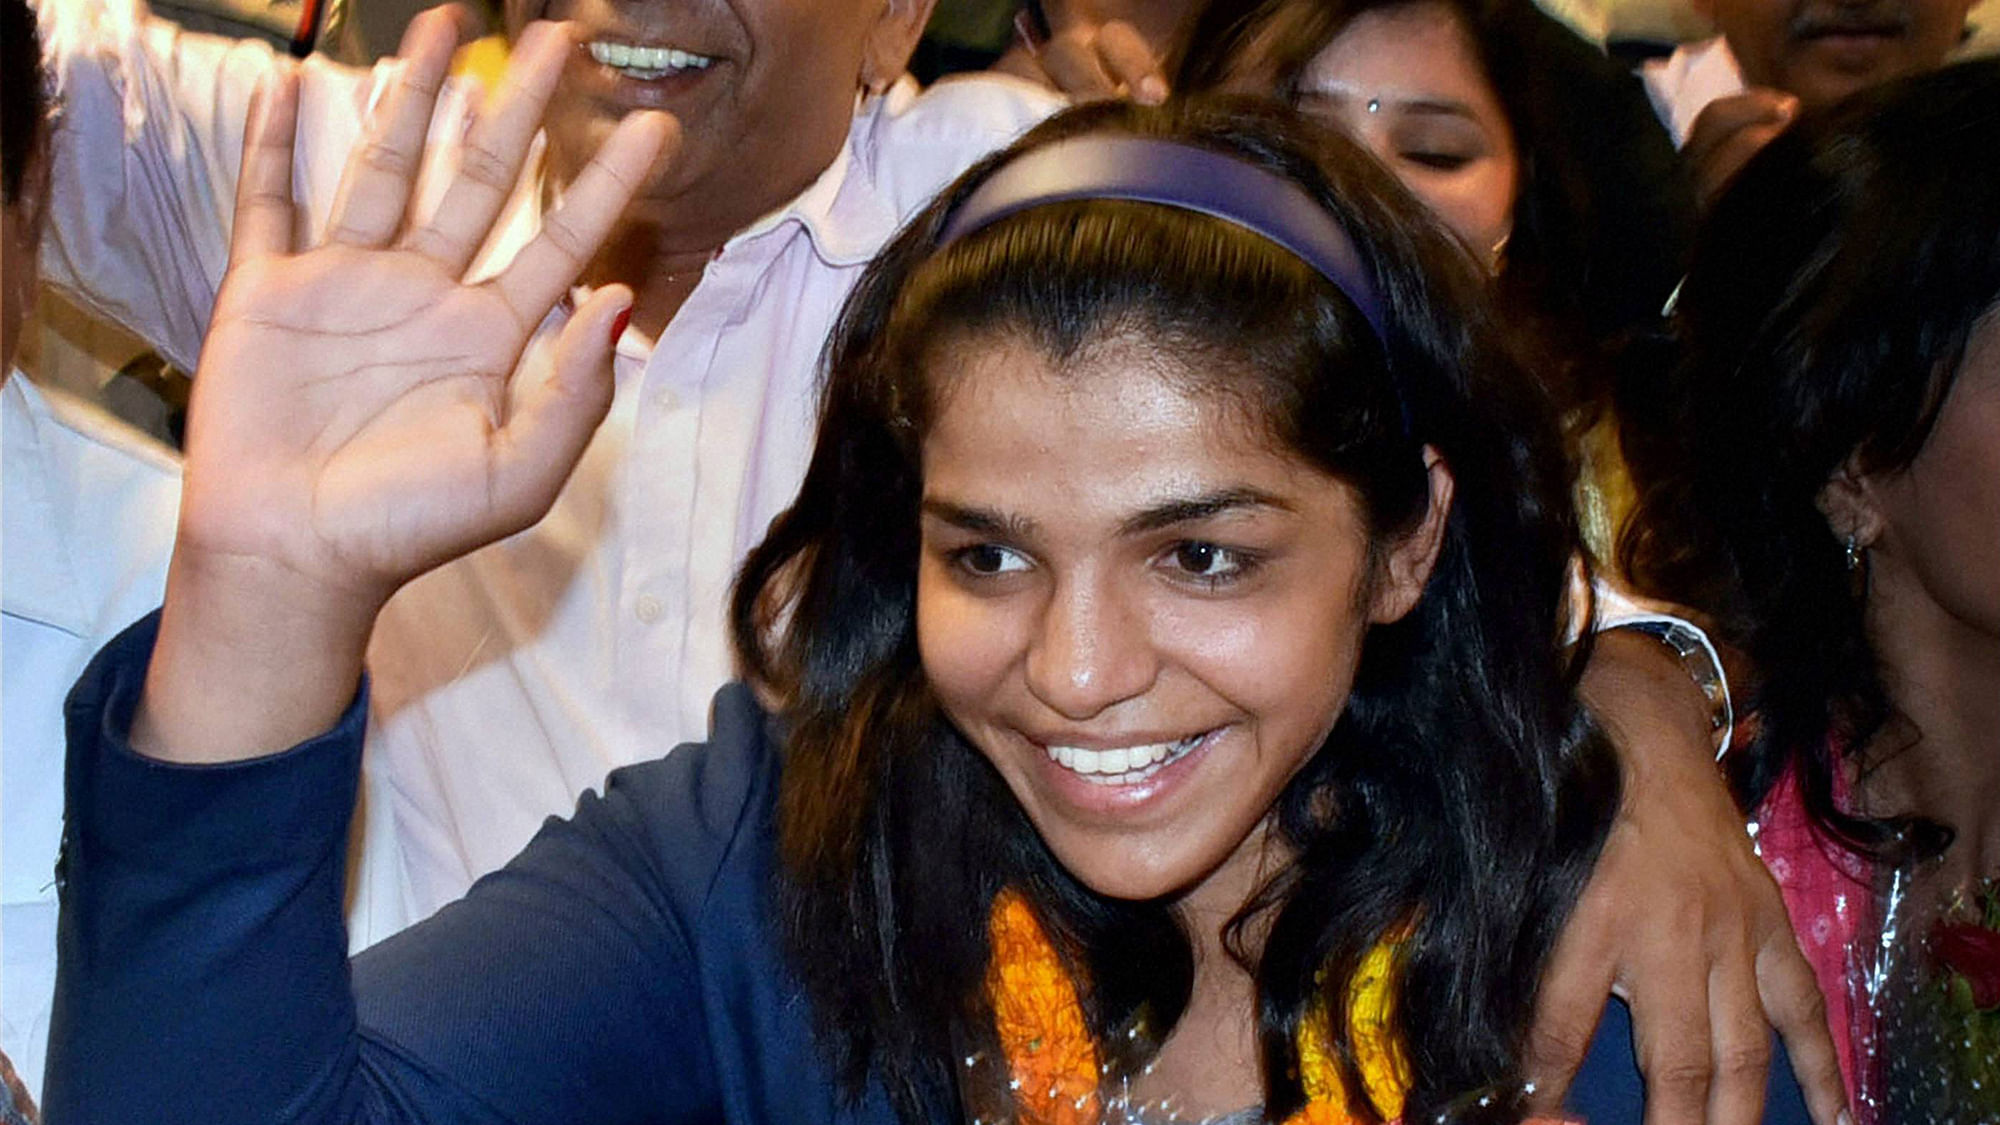 Rio Olympics bronze medalist Indias first woman wrestler Sakshi Malik waves to her fans as she receives a grand welcome on her arrival at IGI airport T3 in New Delhi from Rio de Janeiro early on Wednesday morning. (Photo: PTI)